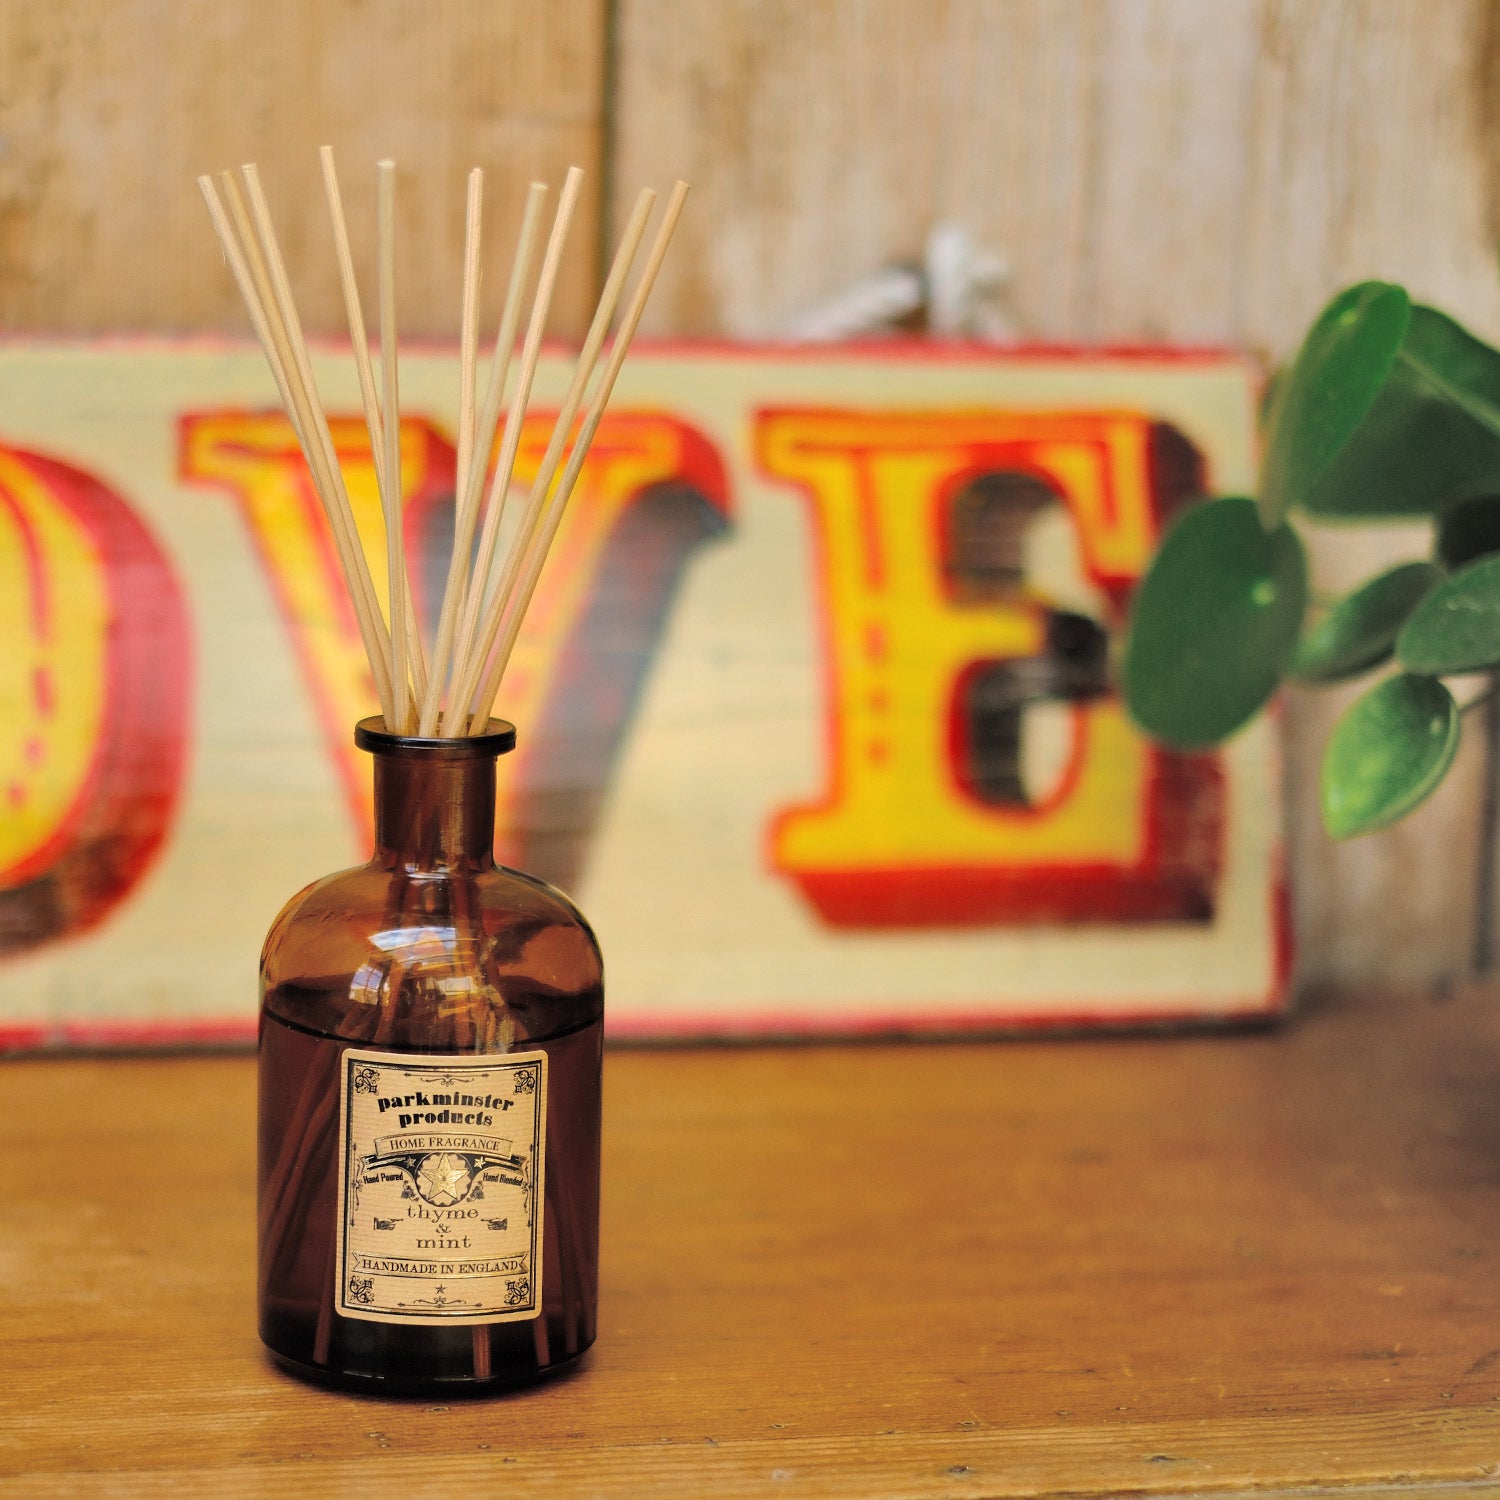 Experience the invigorating blend of Thyme & Mint with Parkminster's 200ml amber glass Apothecary Reed Diffuser. Crafted in our Cornish workshop using 100% plant-based ingredients, this diffuser provides a stylish and naturally fresh herbal scent for your home